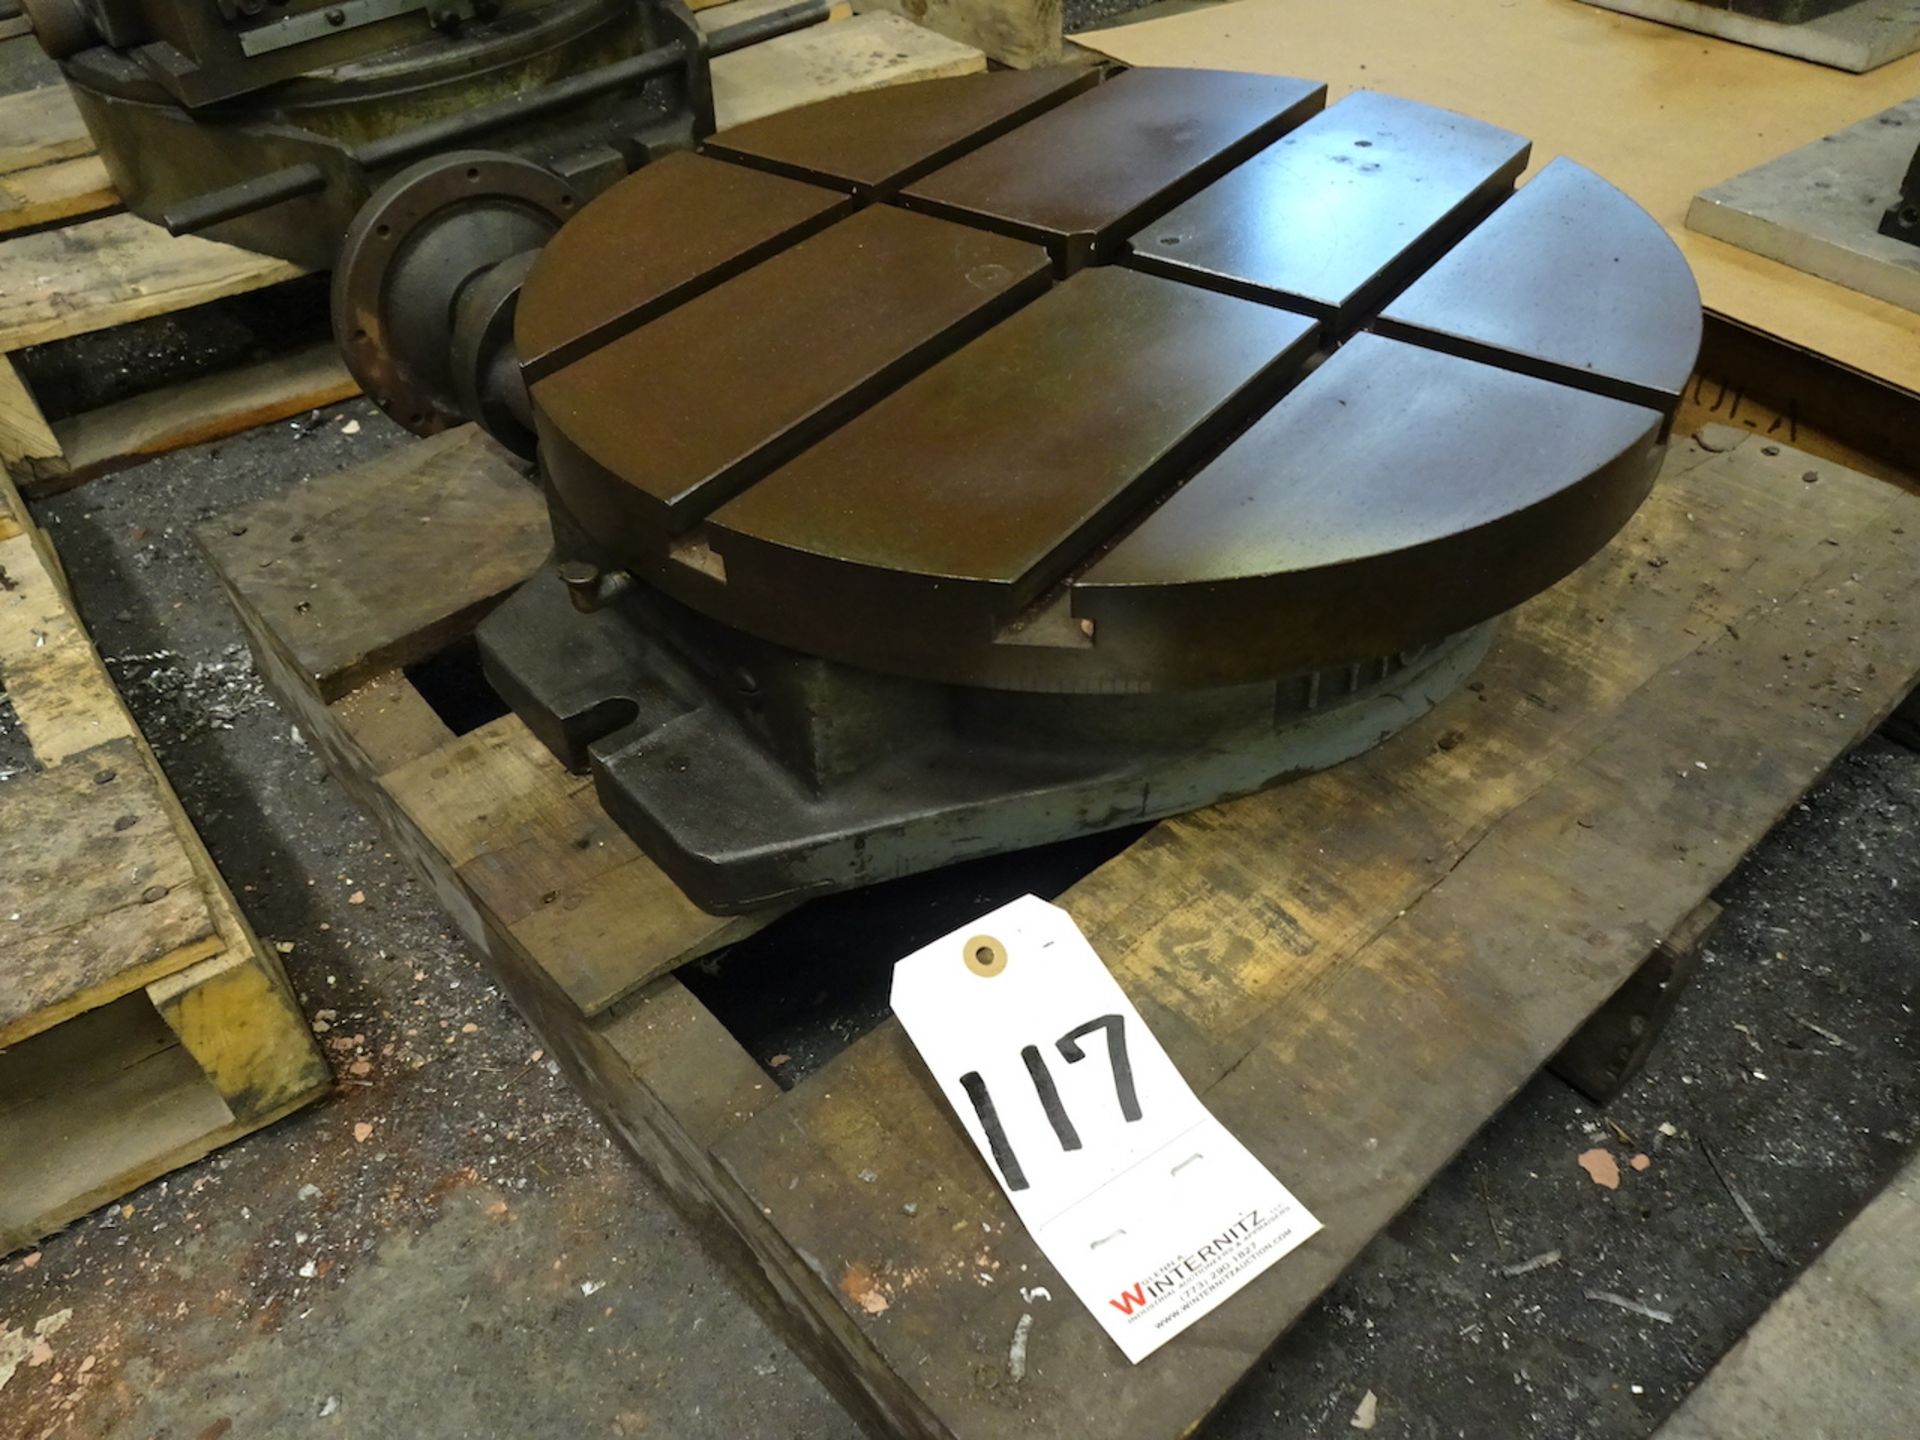 TROYKE 18 IN. ROTARY TABLE